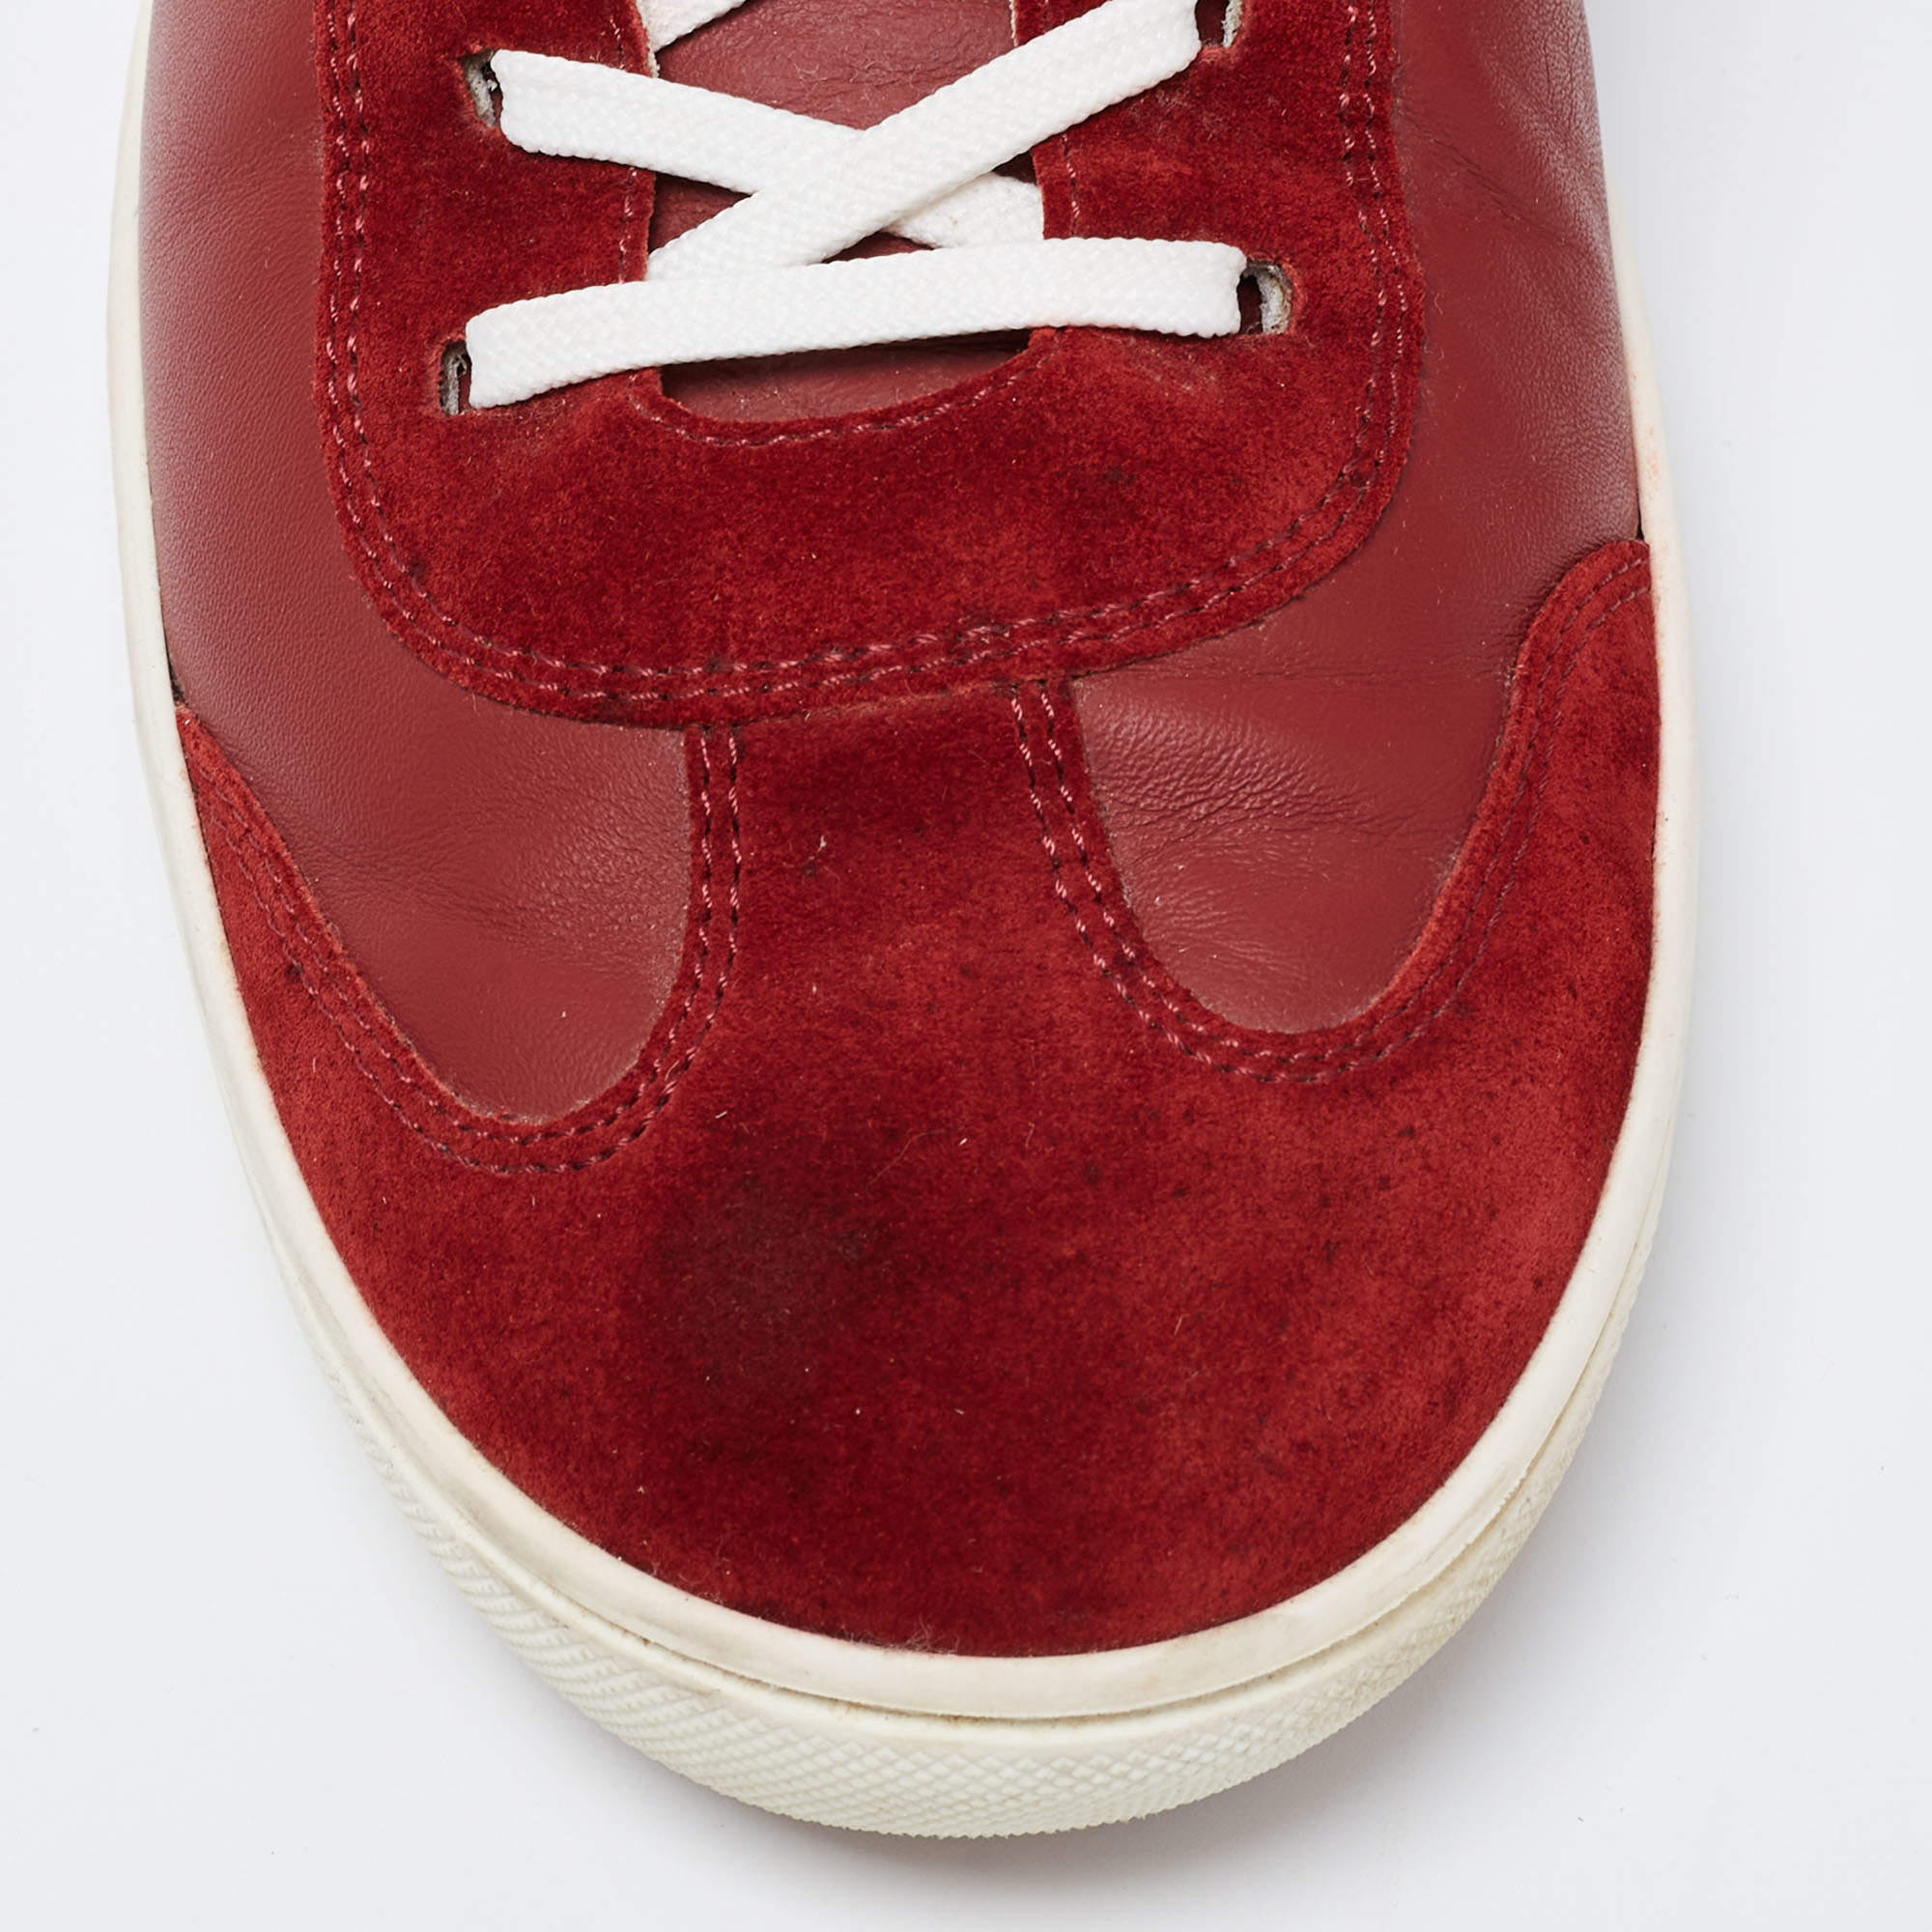 Louis Vuitton Red Leather and Suede Genesis Low-Top Sneakers Size